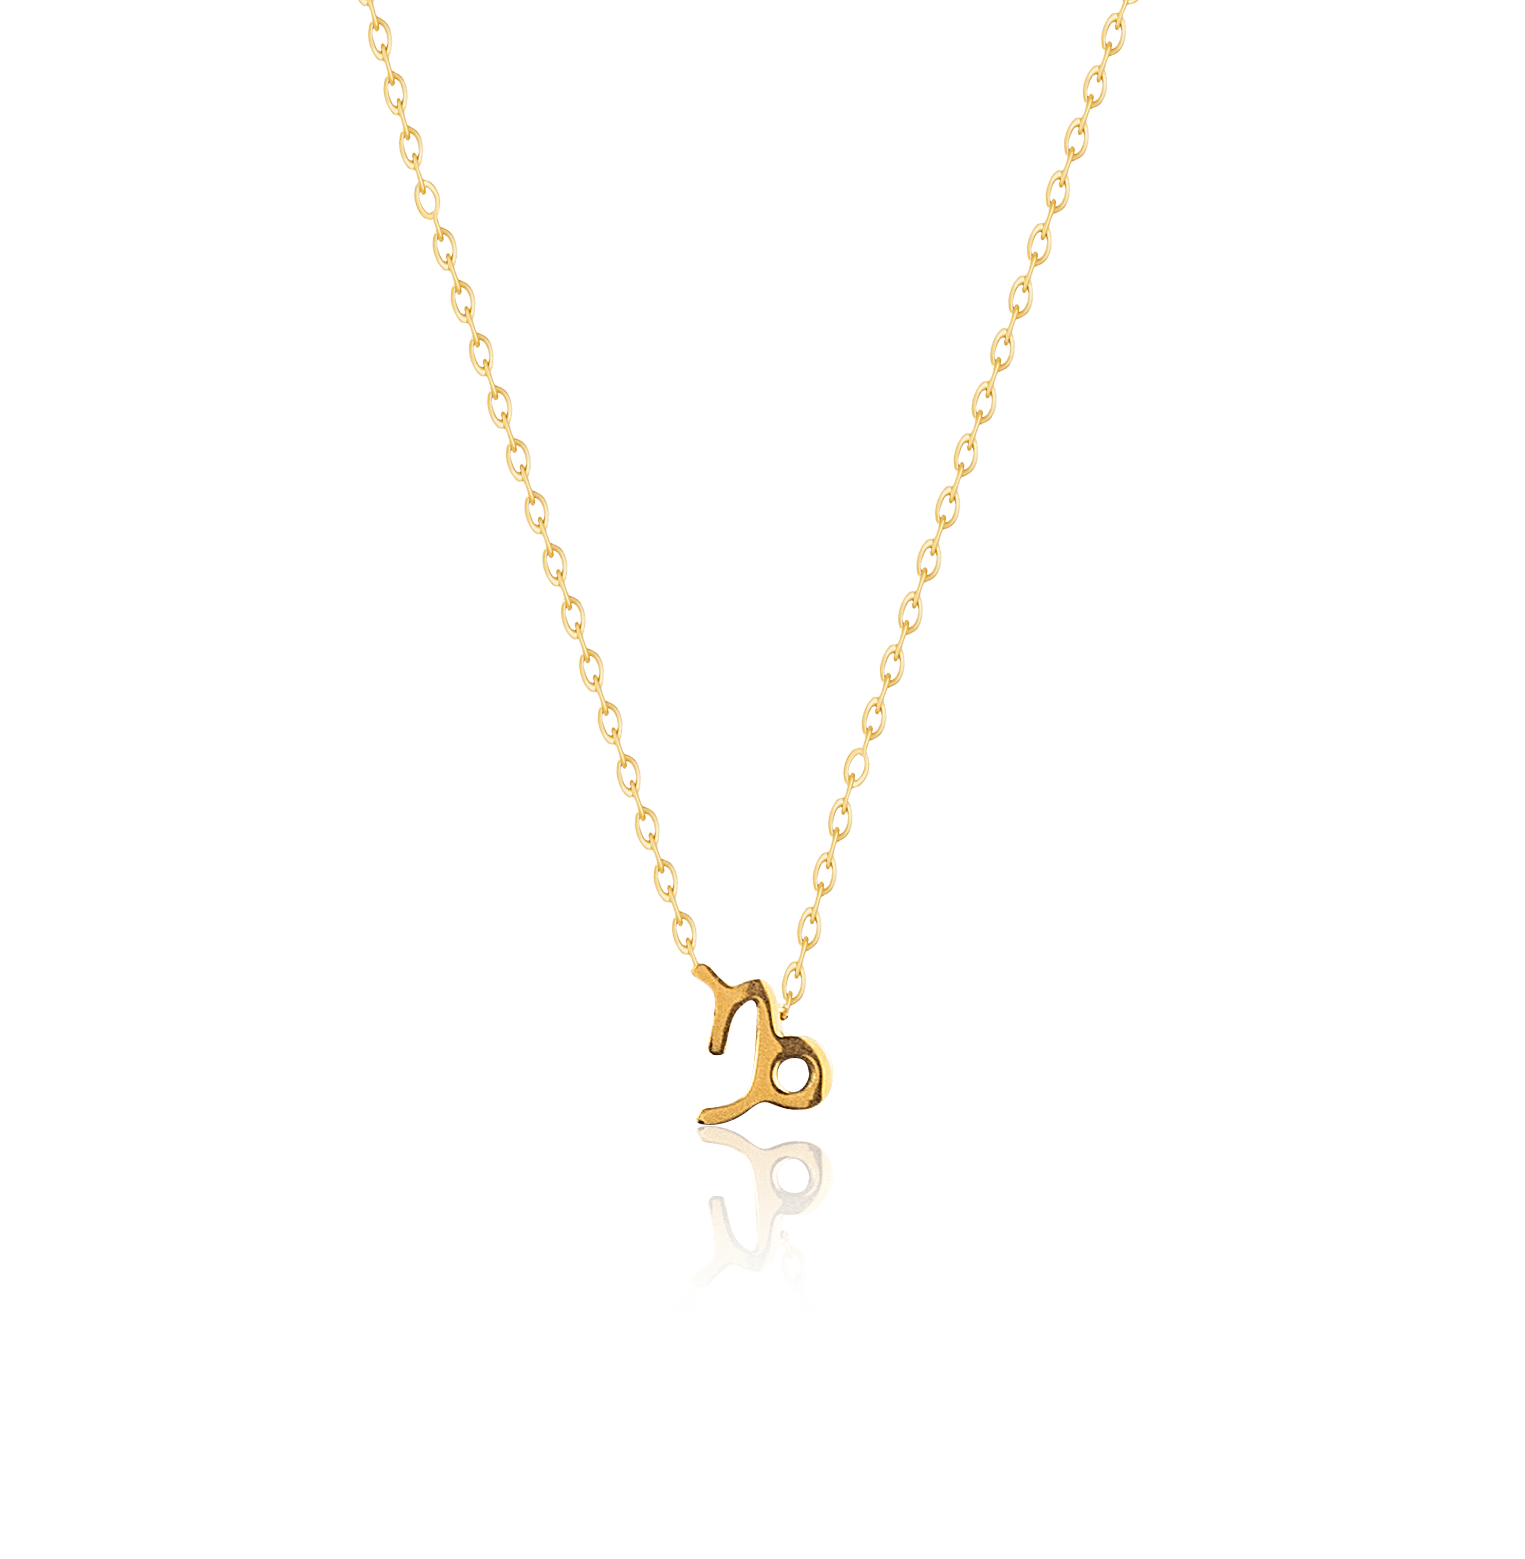 bianco rosso Necklaces Gold Capricorn - Necklace cyprus greece jewelry gift free shipping europe worldwide